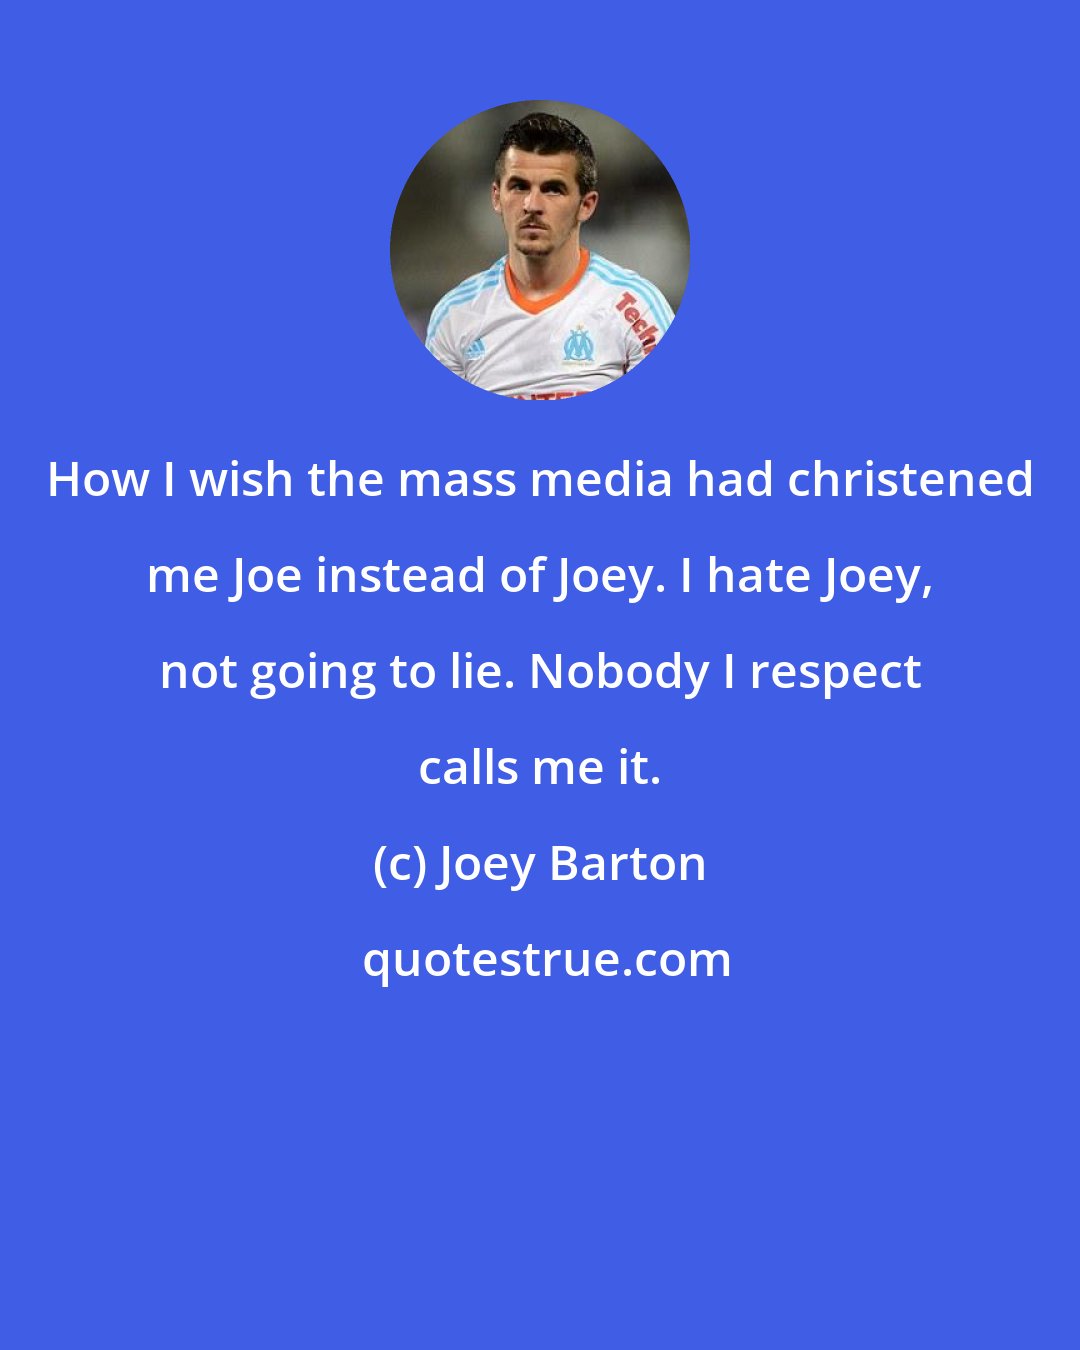 Joey Barton: How I wish the mass media had christened me Joe instead of Joey. I hate Joey, not going to lie. Nobody I respect calls me it.